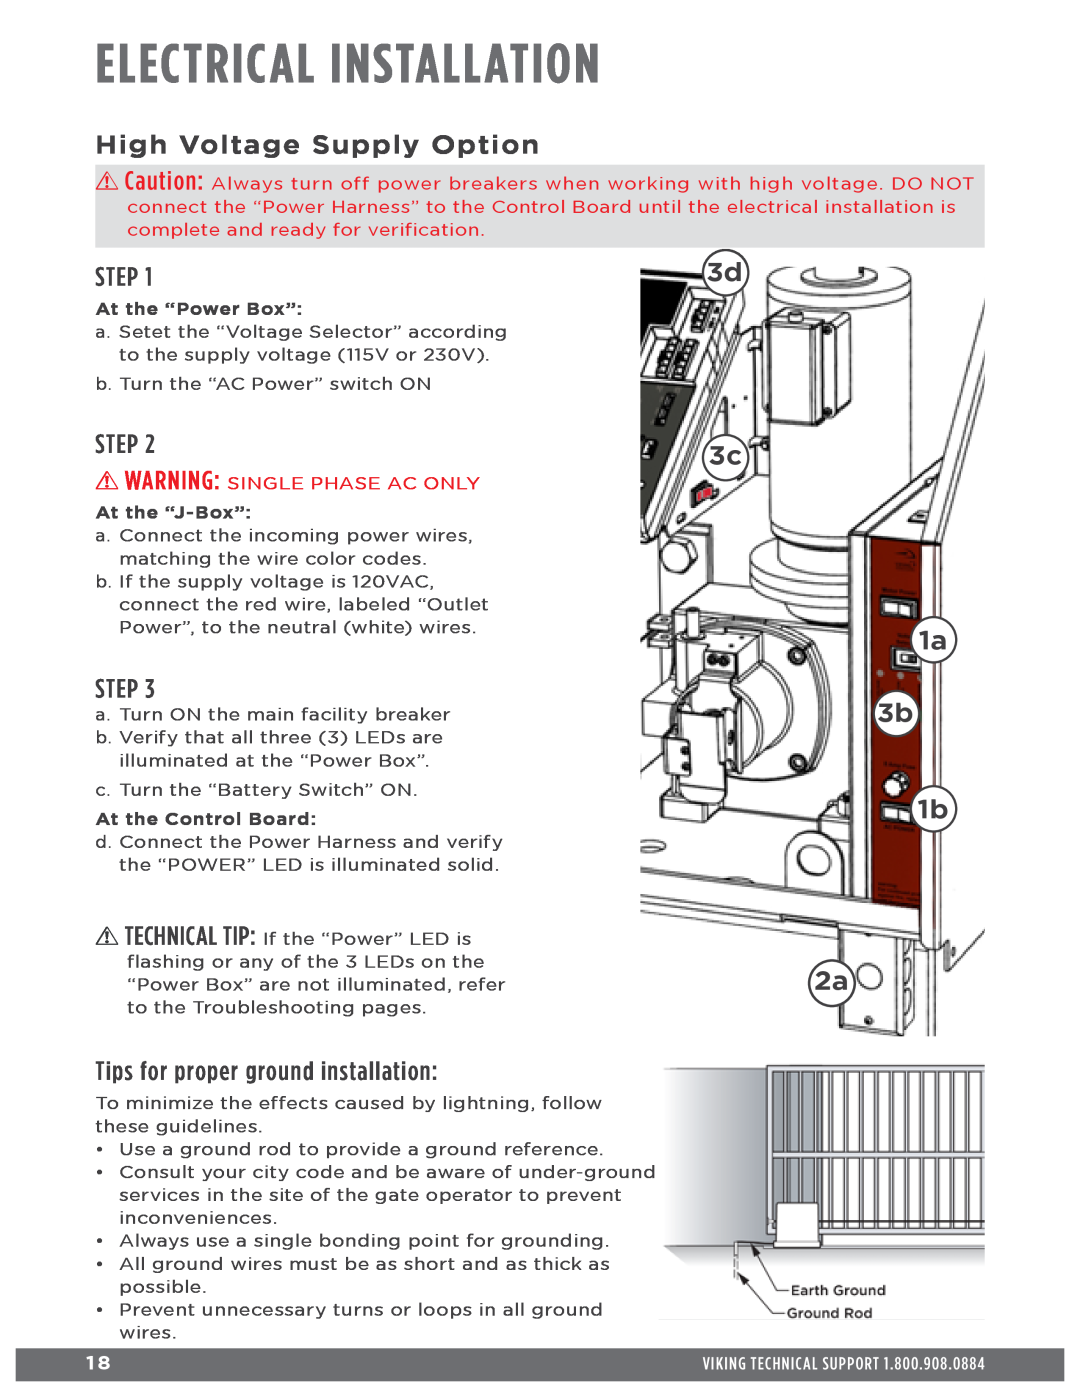 Viking Access Systems Q7 Electrical Installation, High Voltage Supply Option, Tips for proper ground installation, Step 